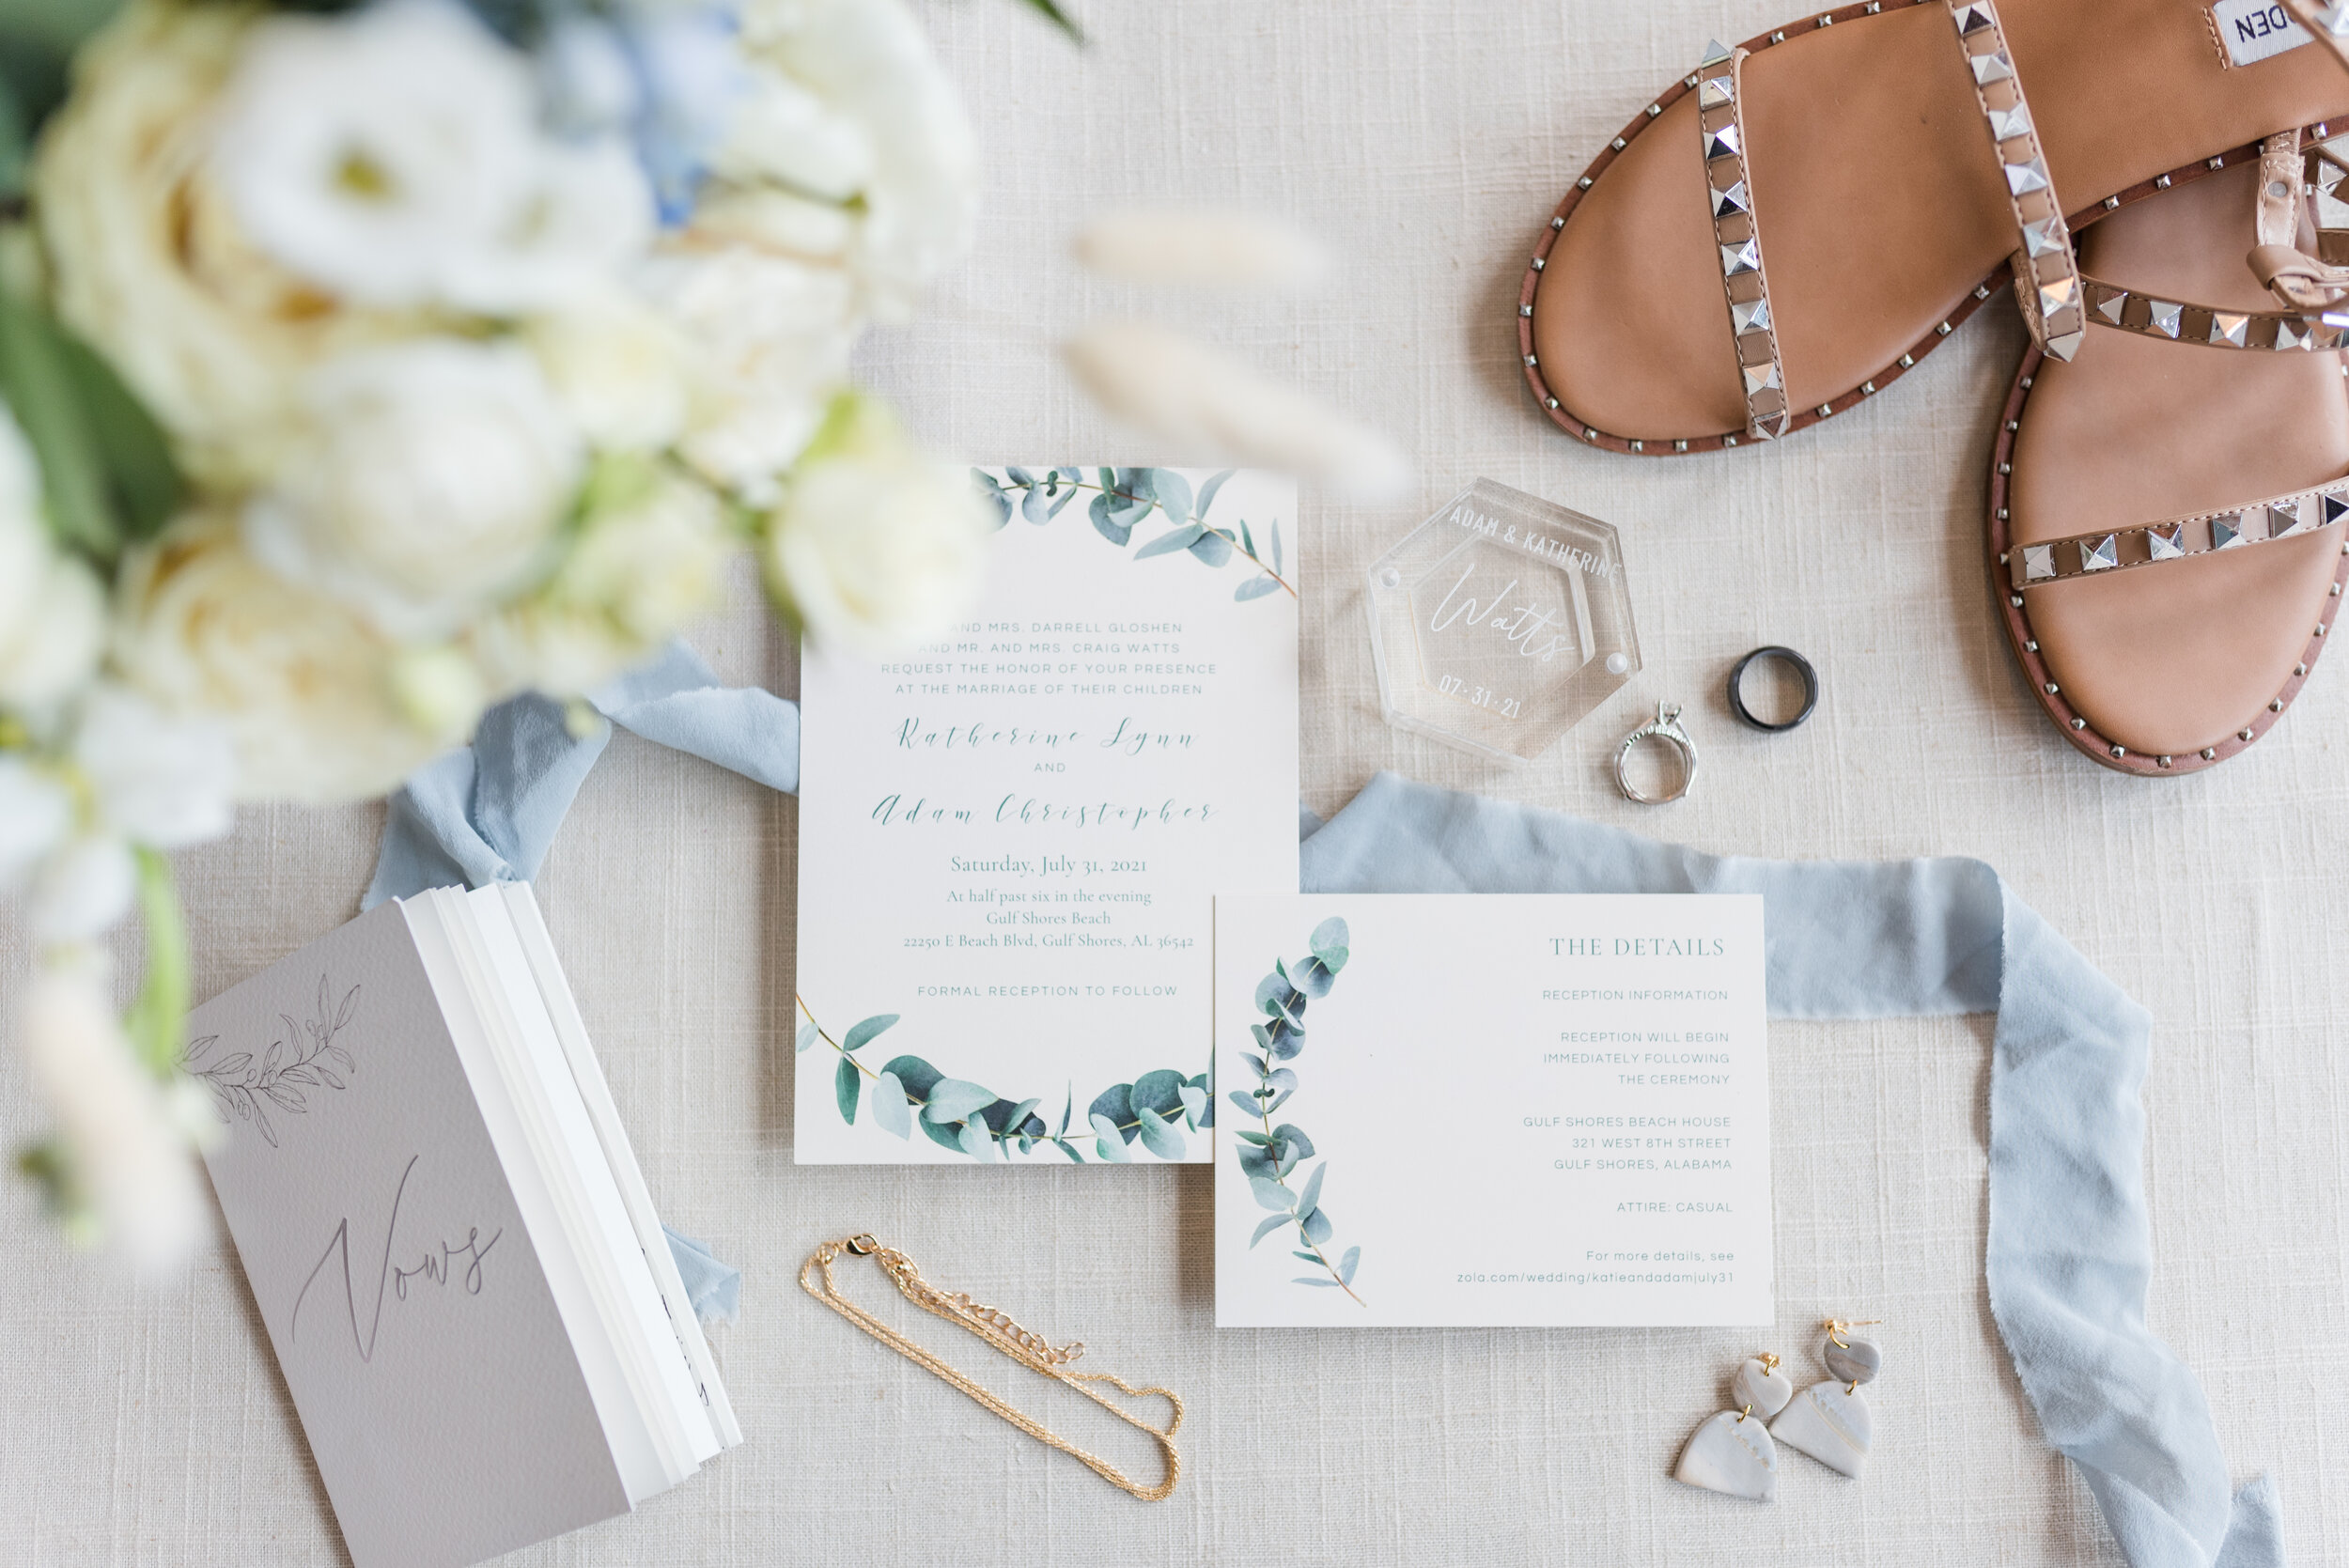 July Orange Beach Wedding Details Photographed by Kristen Marcus Photography